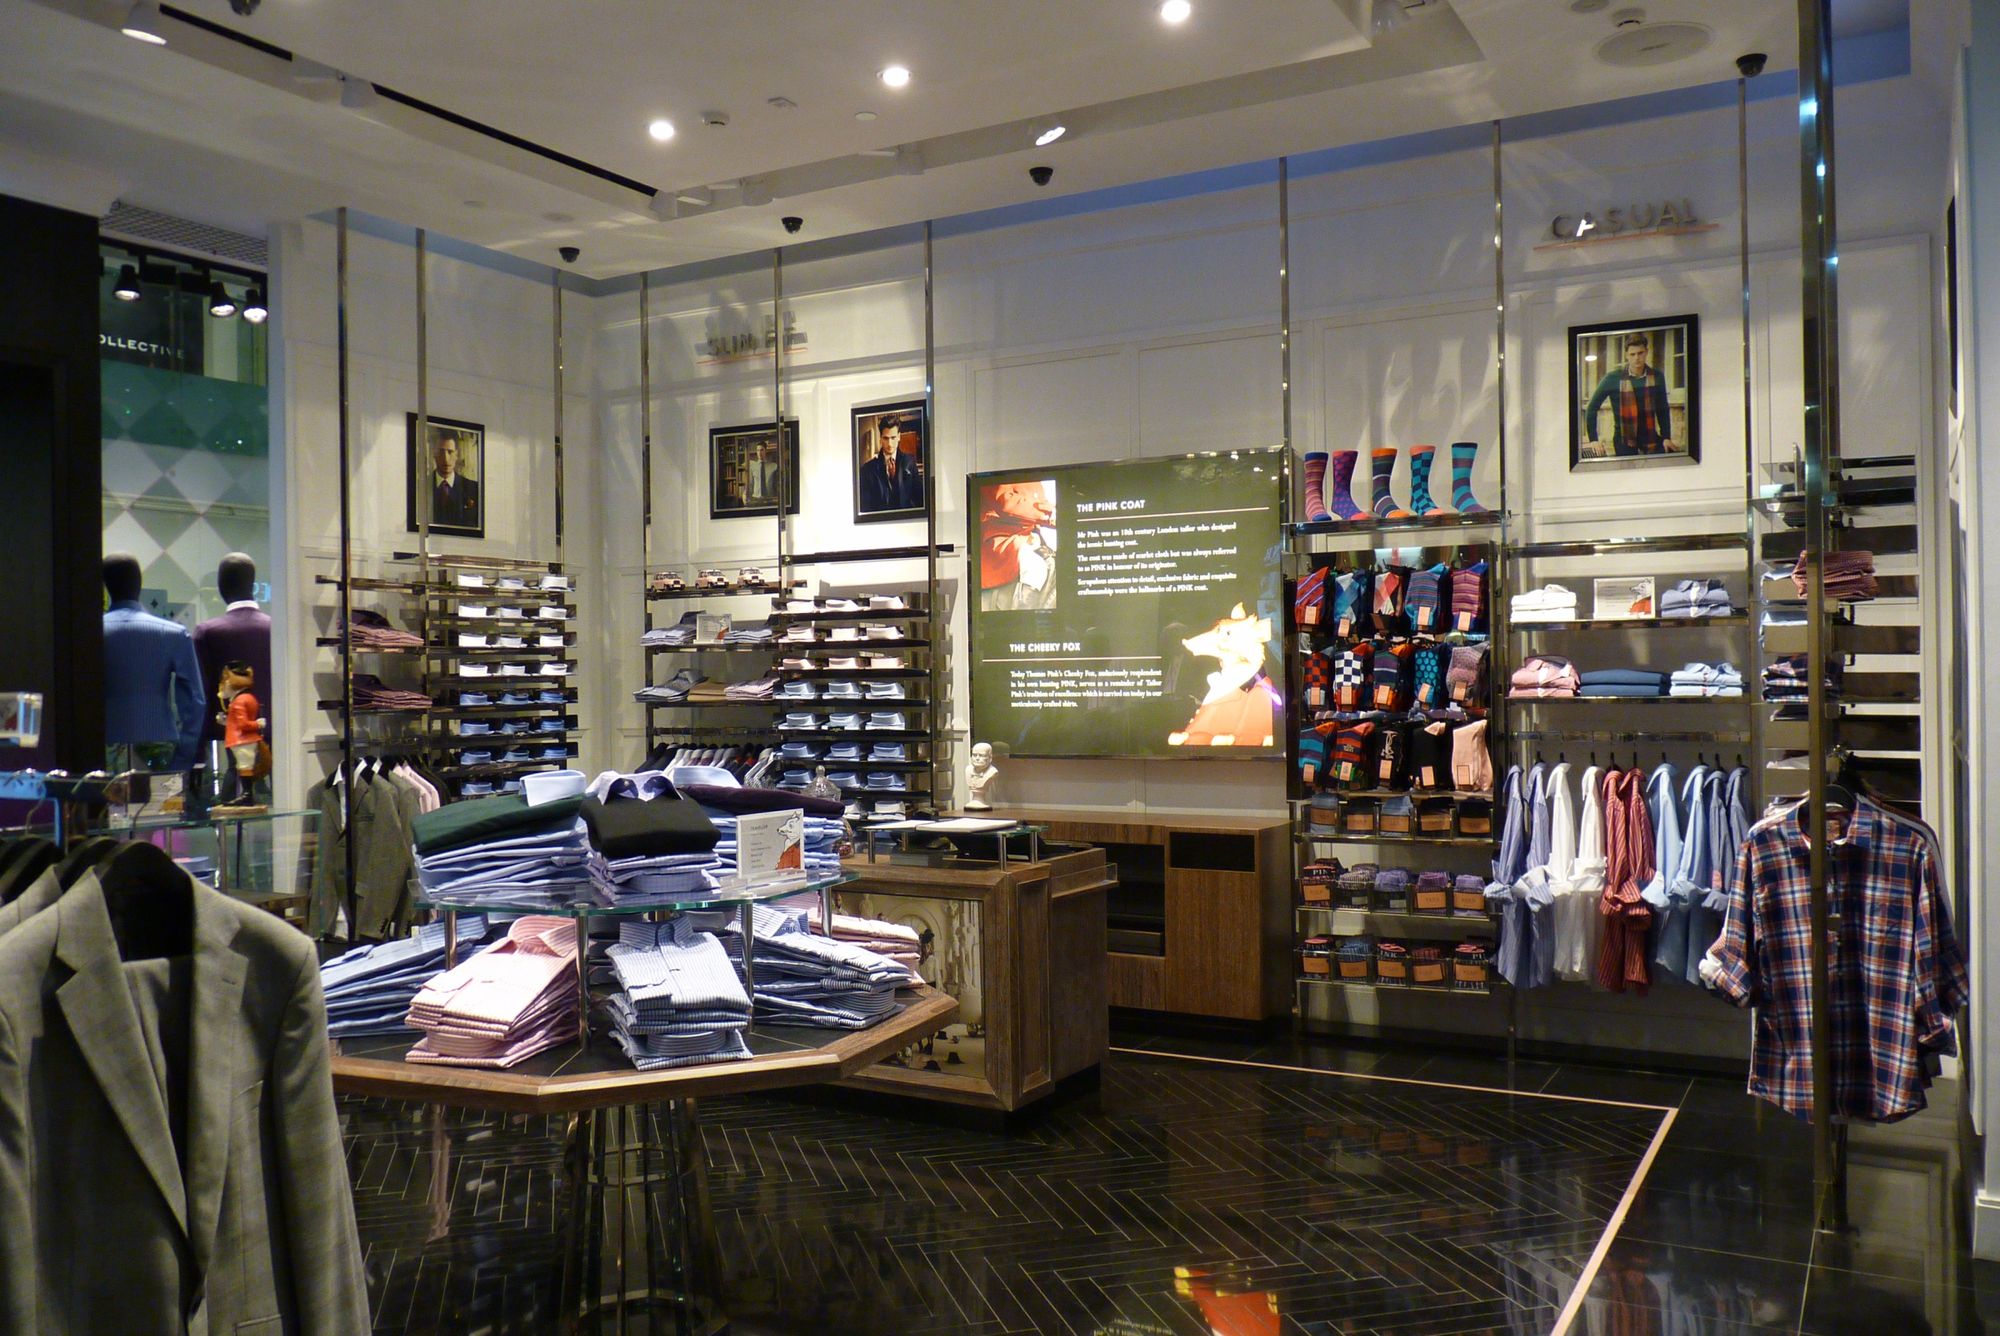 Inside view of Thomas Pink store in Ambience Mall